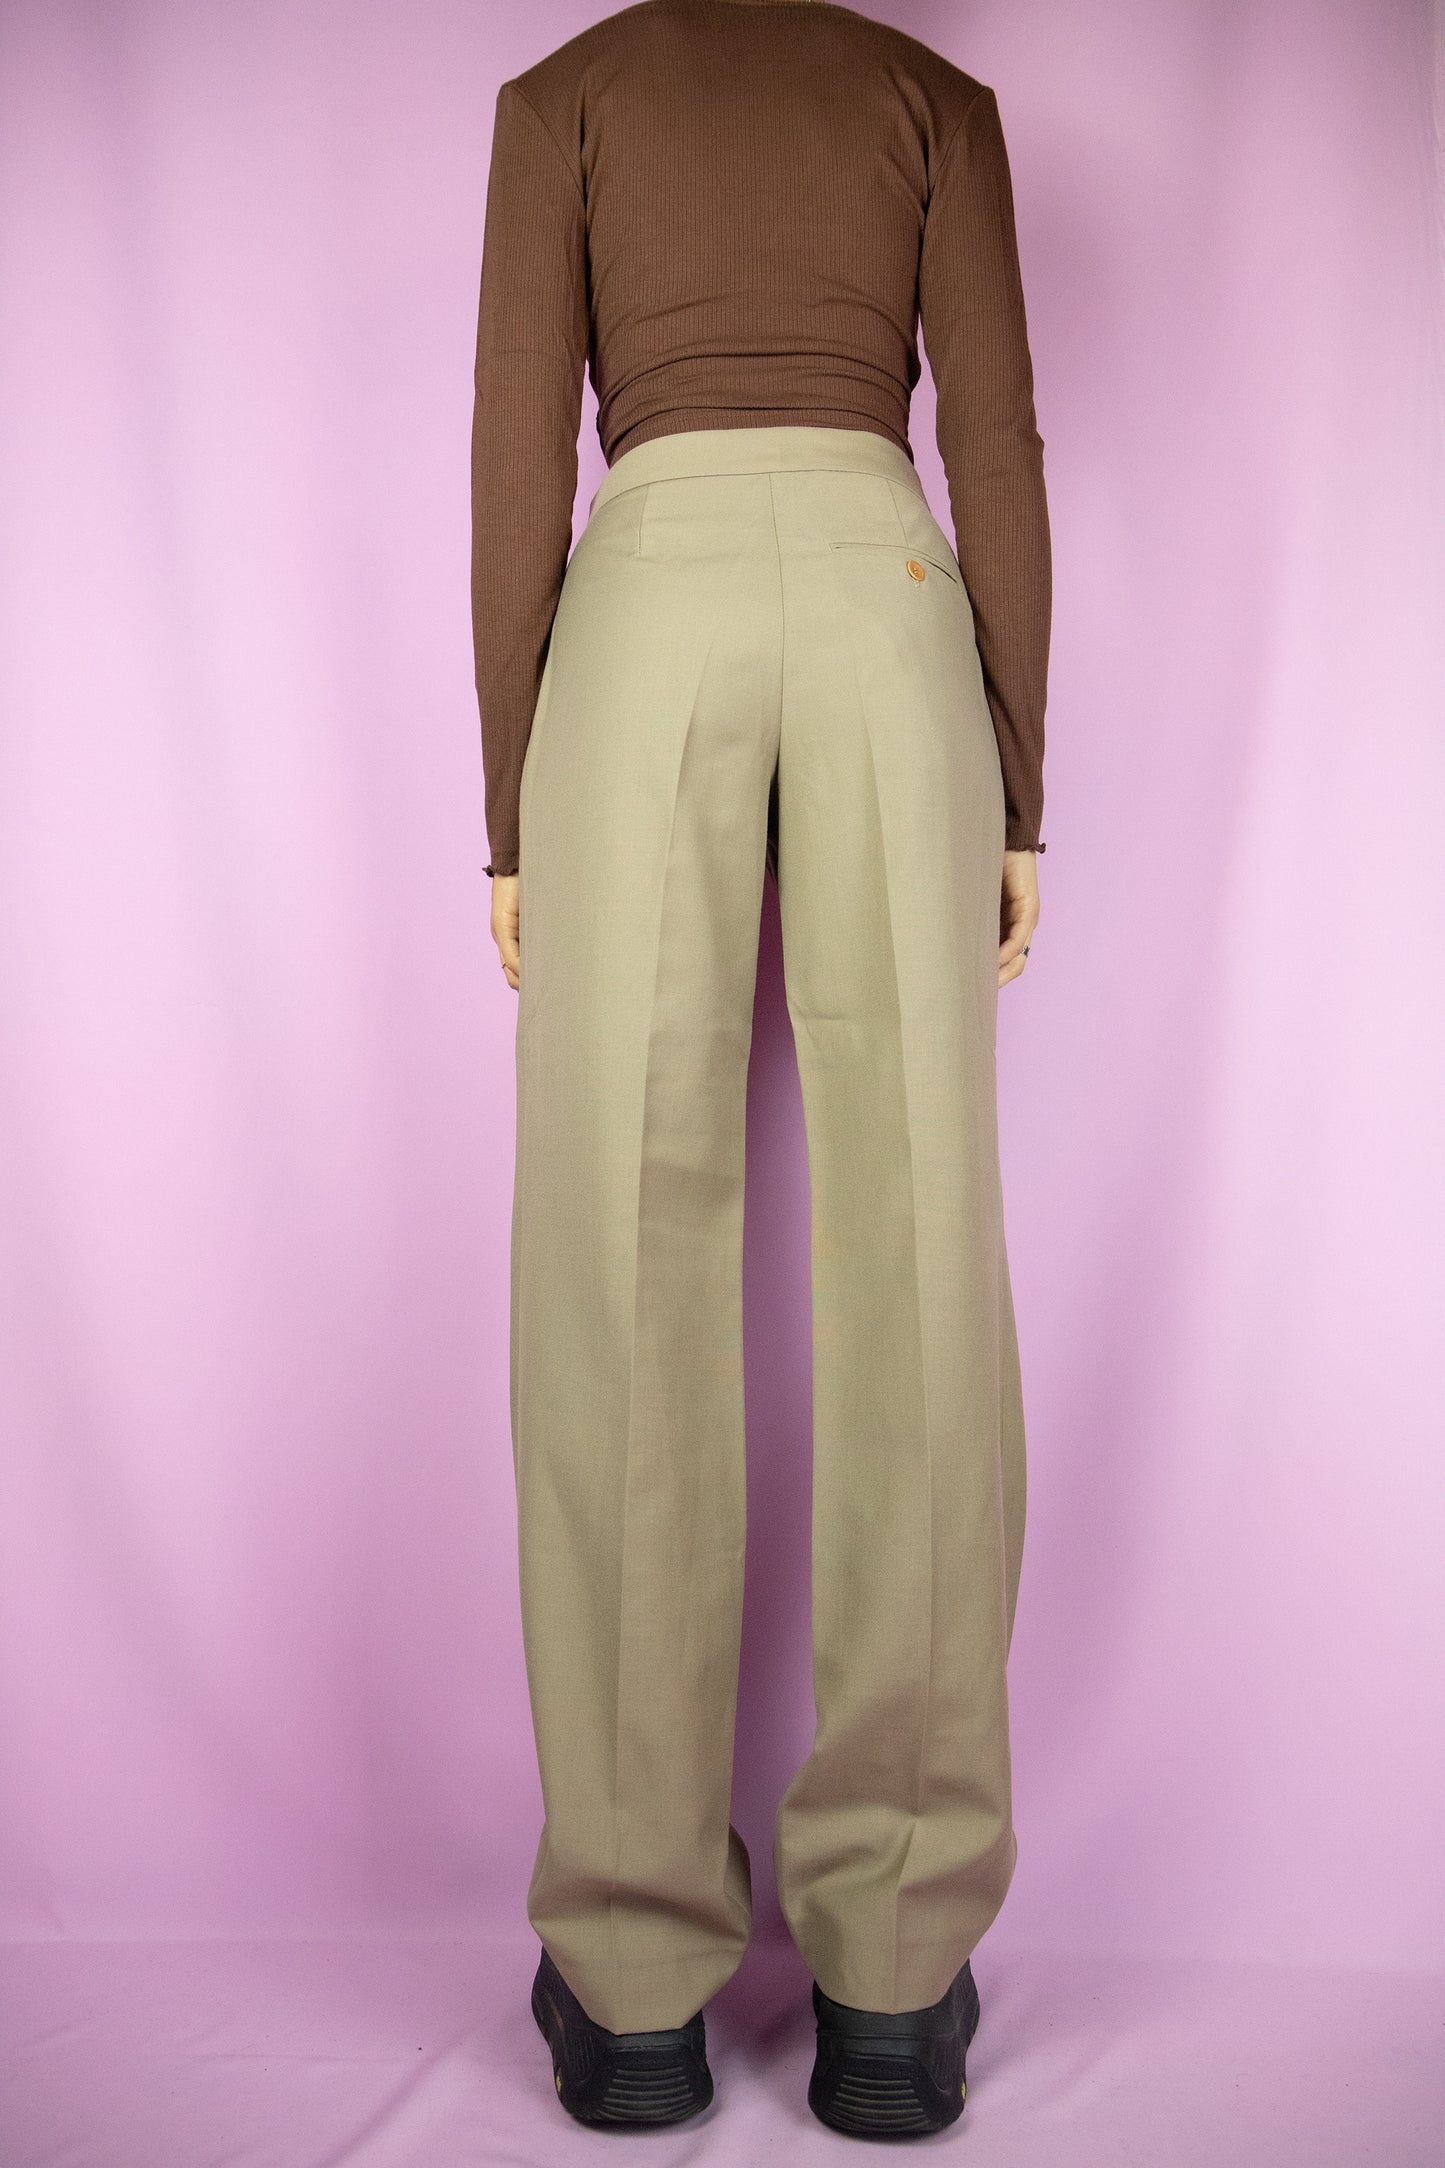 Vintage 90s Beige Pleated Trousers - S